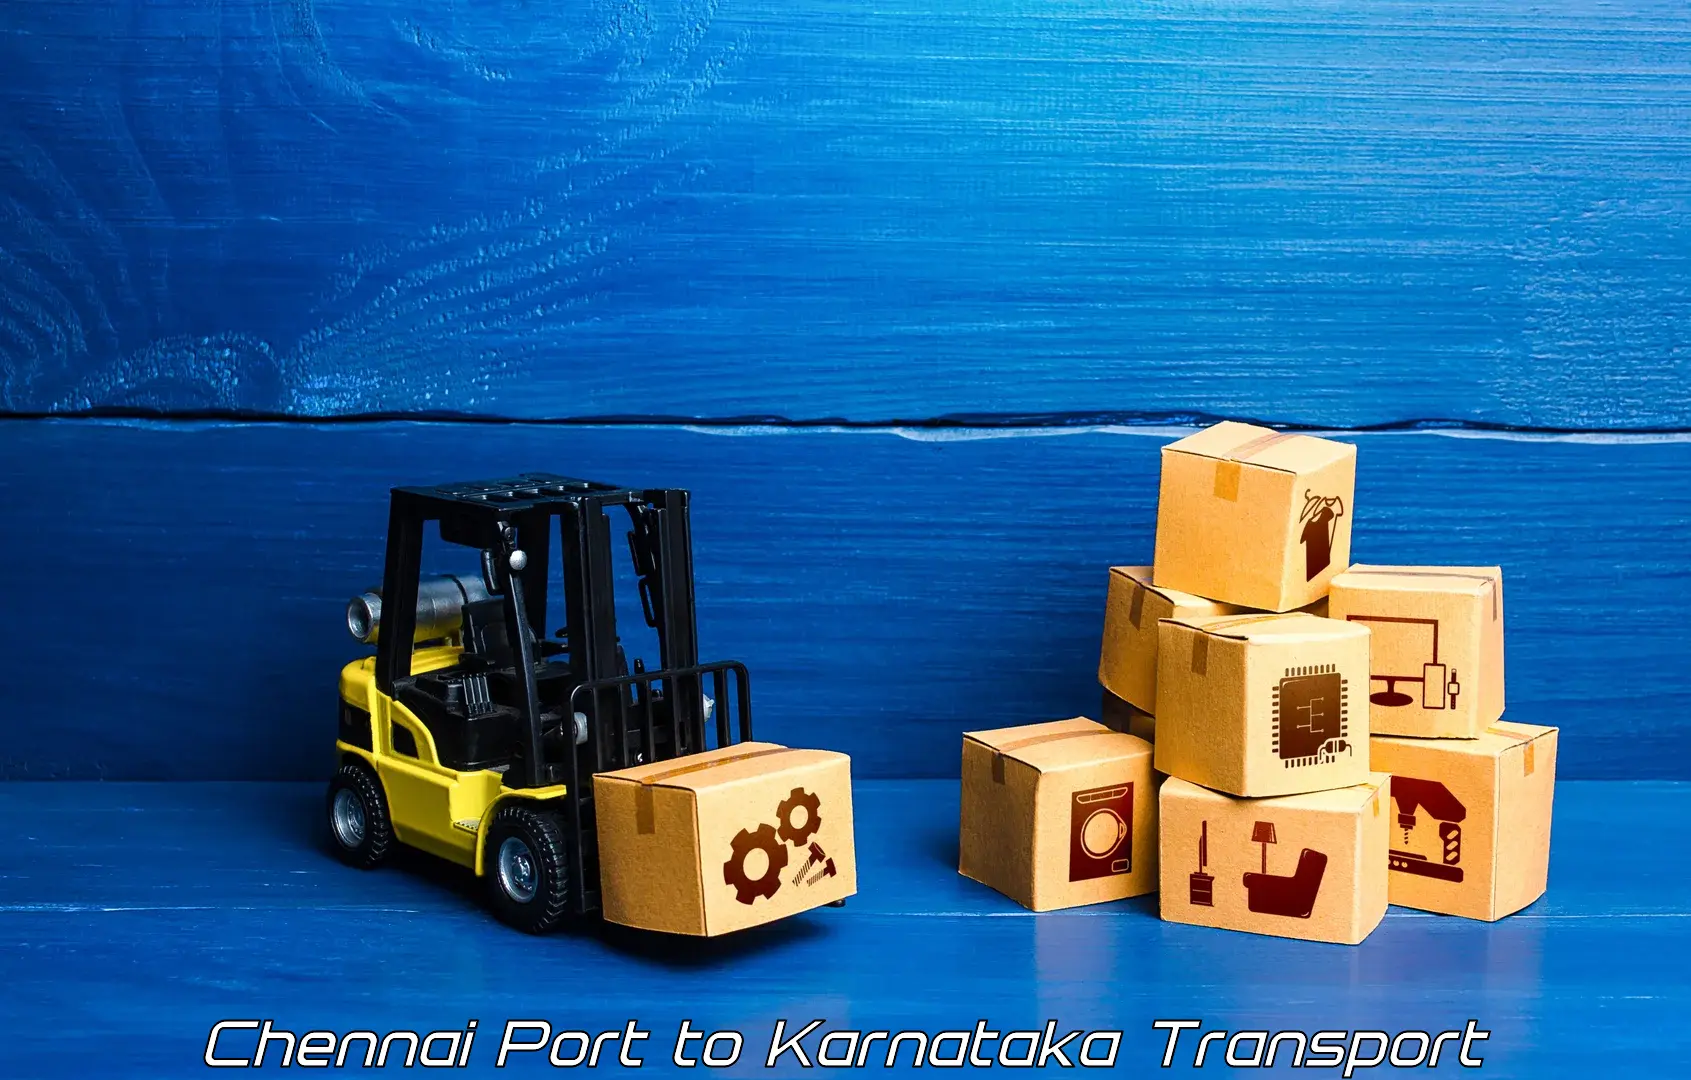 Cargo train transport services in Chennai Port to Bangalore